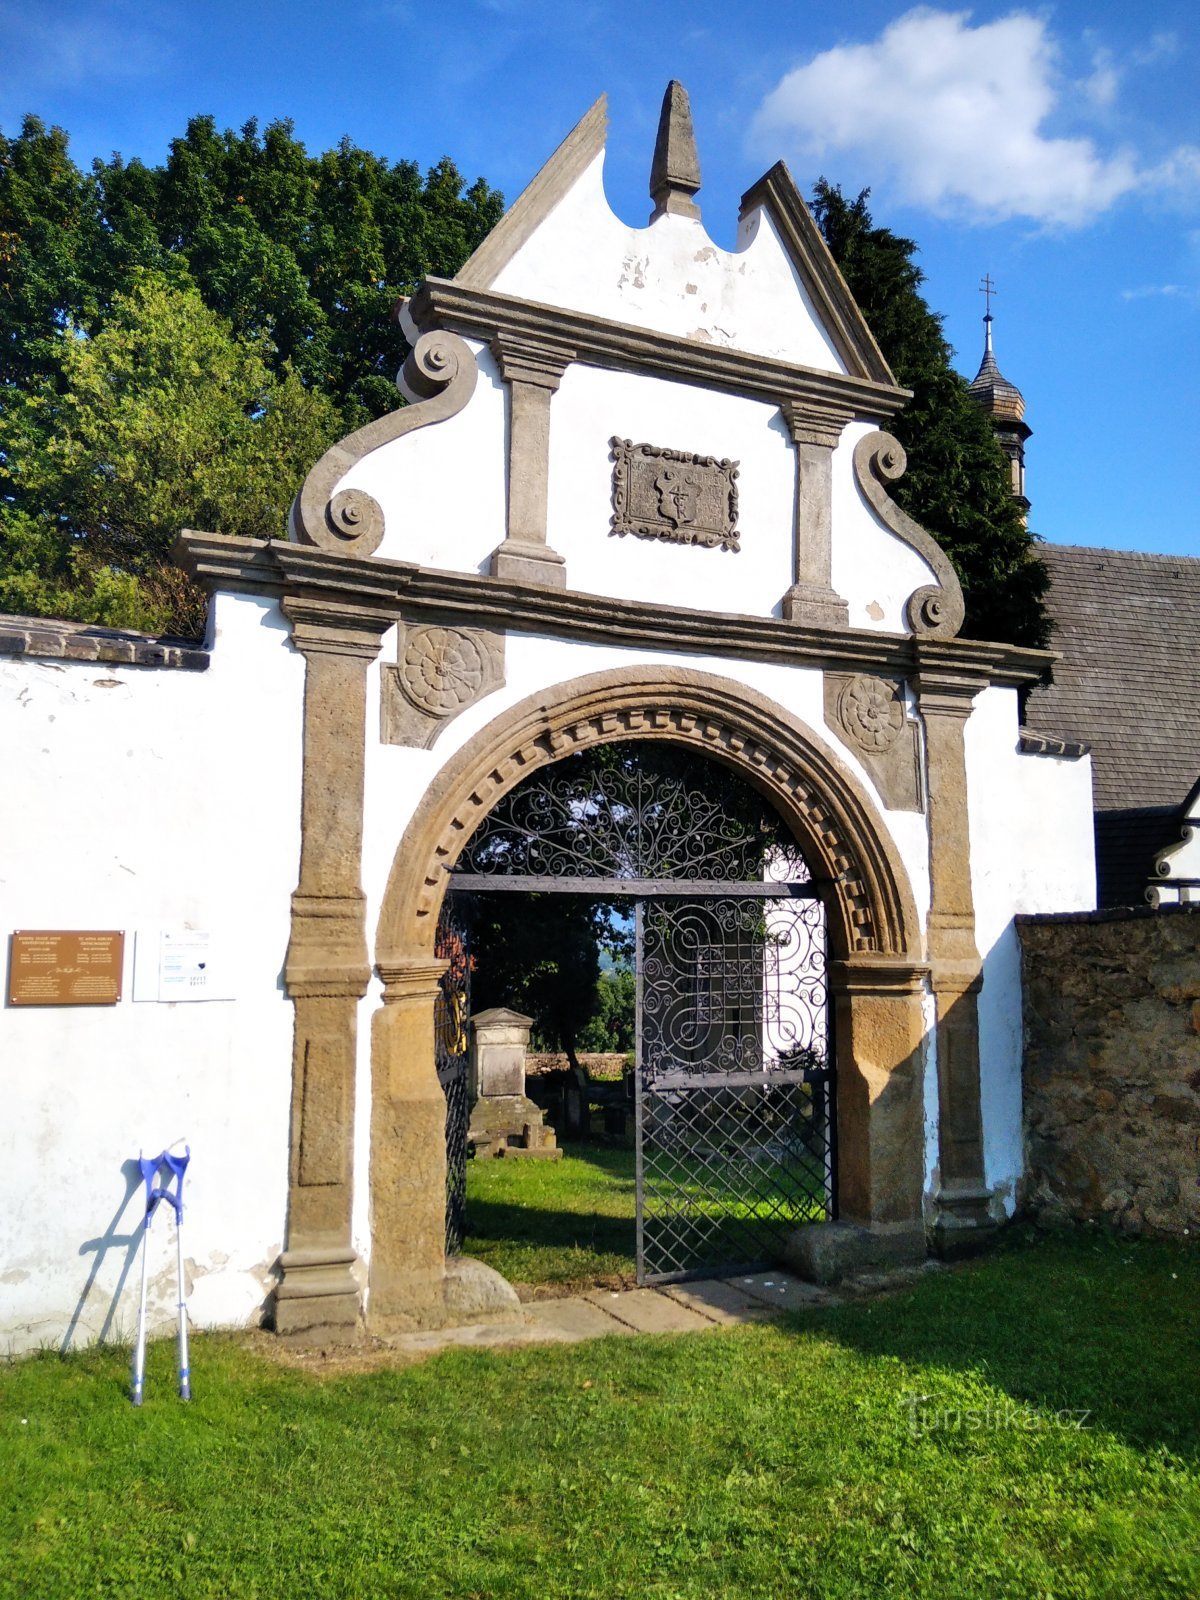 Renaissance cemetery gate from 1615